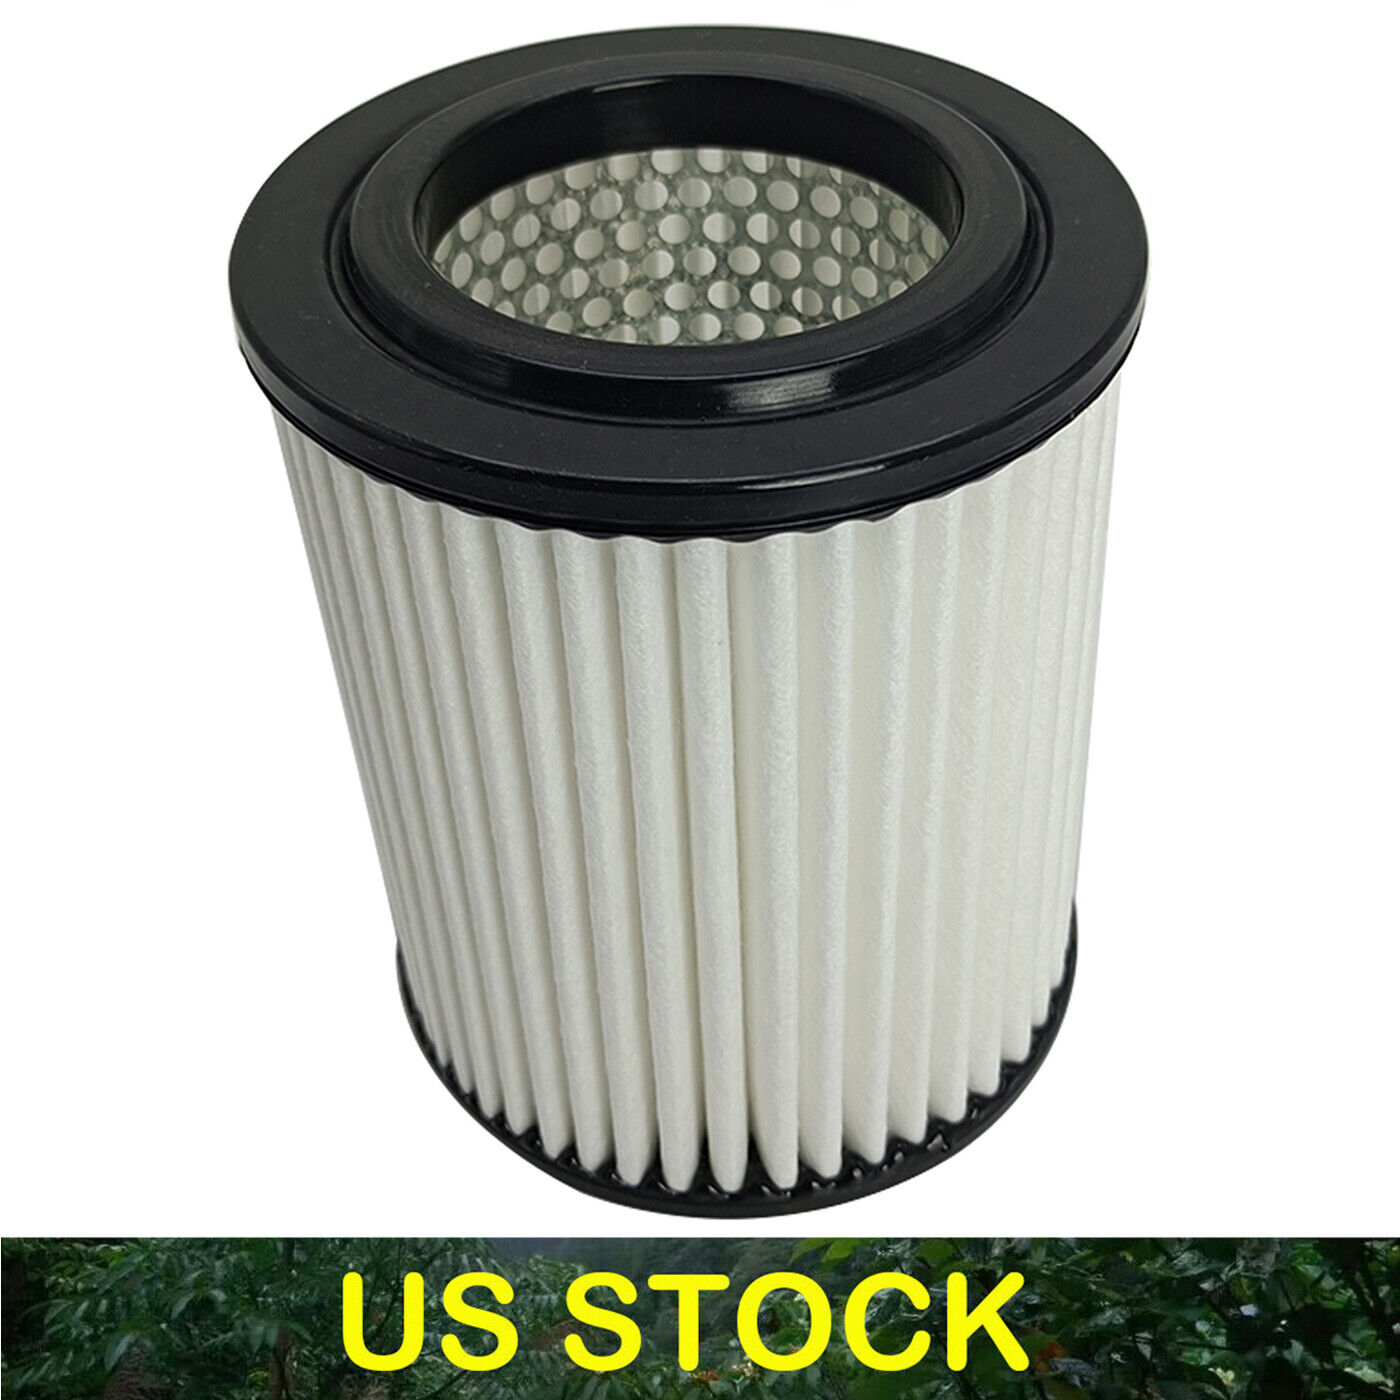 Engine Air Filter For 02-05 Civic Si 02-06 CR-V 03-06 Element 02-06 Acura RSX 